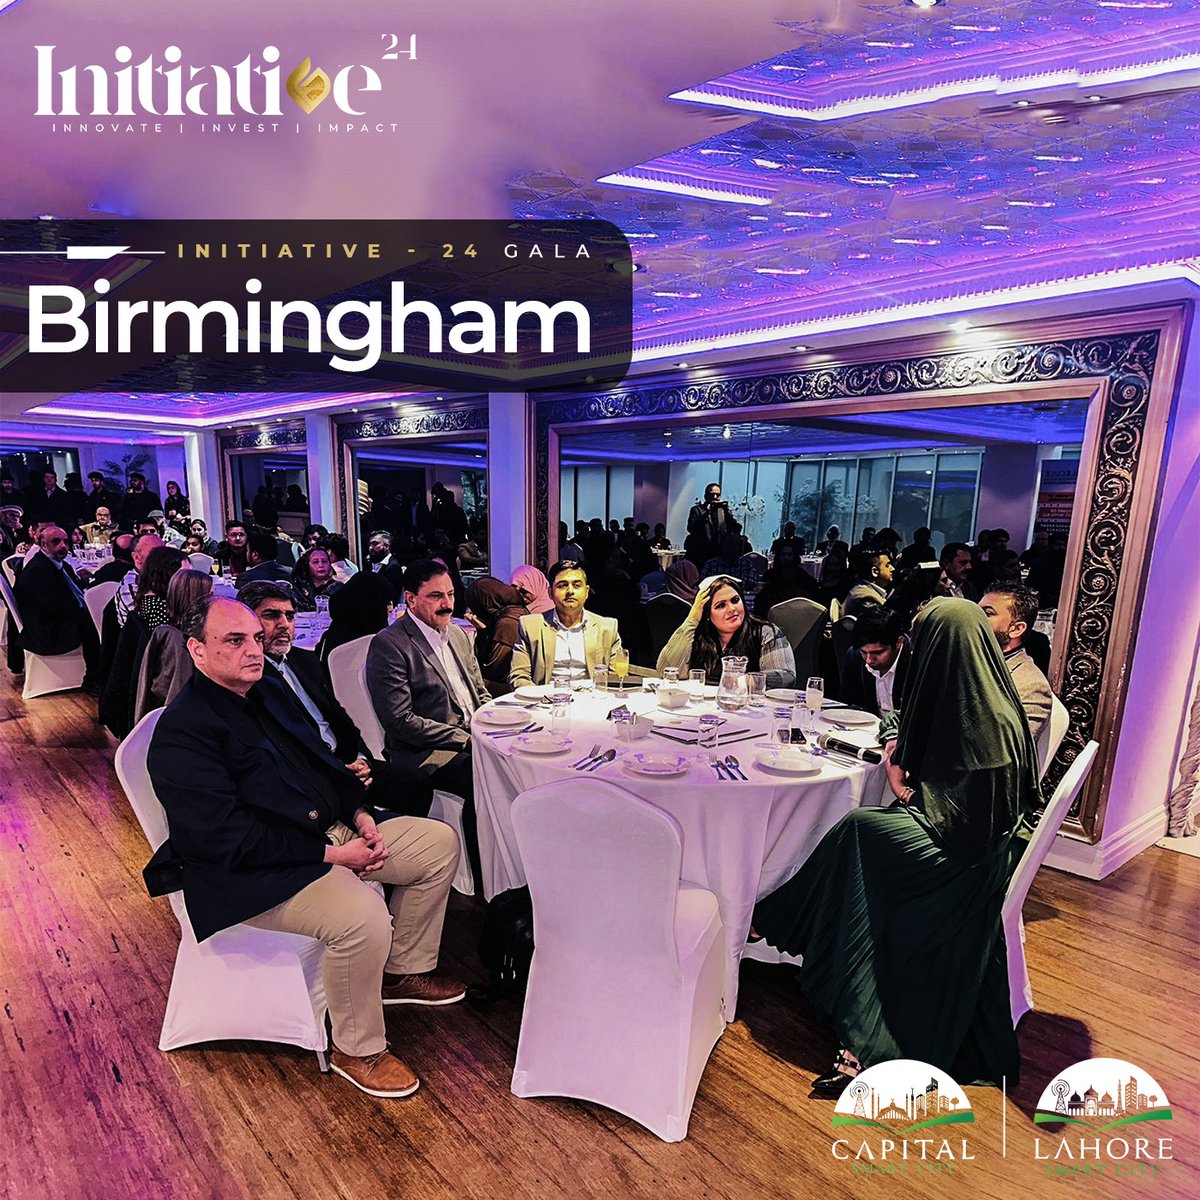 Still buzzing from the vibrant event in #Birmingham! Thank you to everyone who made it possible. Keep an eye out for more from this incredible country. #SmartCity #CapitalSmartCity #Initiatives24Gala #Initiatives24 #Impact #Invest #Innovate #Initiatives24GalaBirmingham